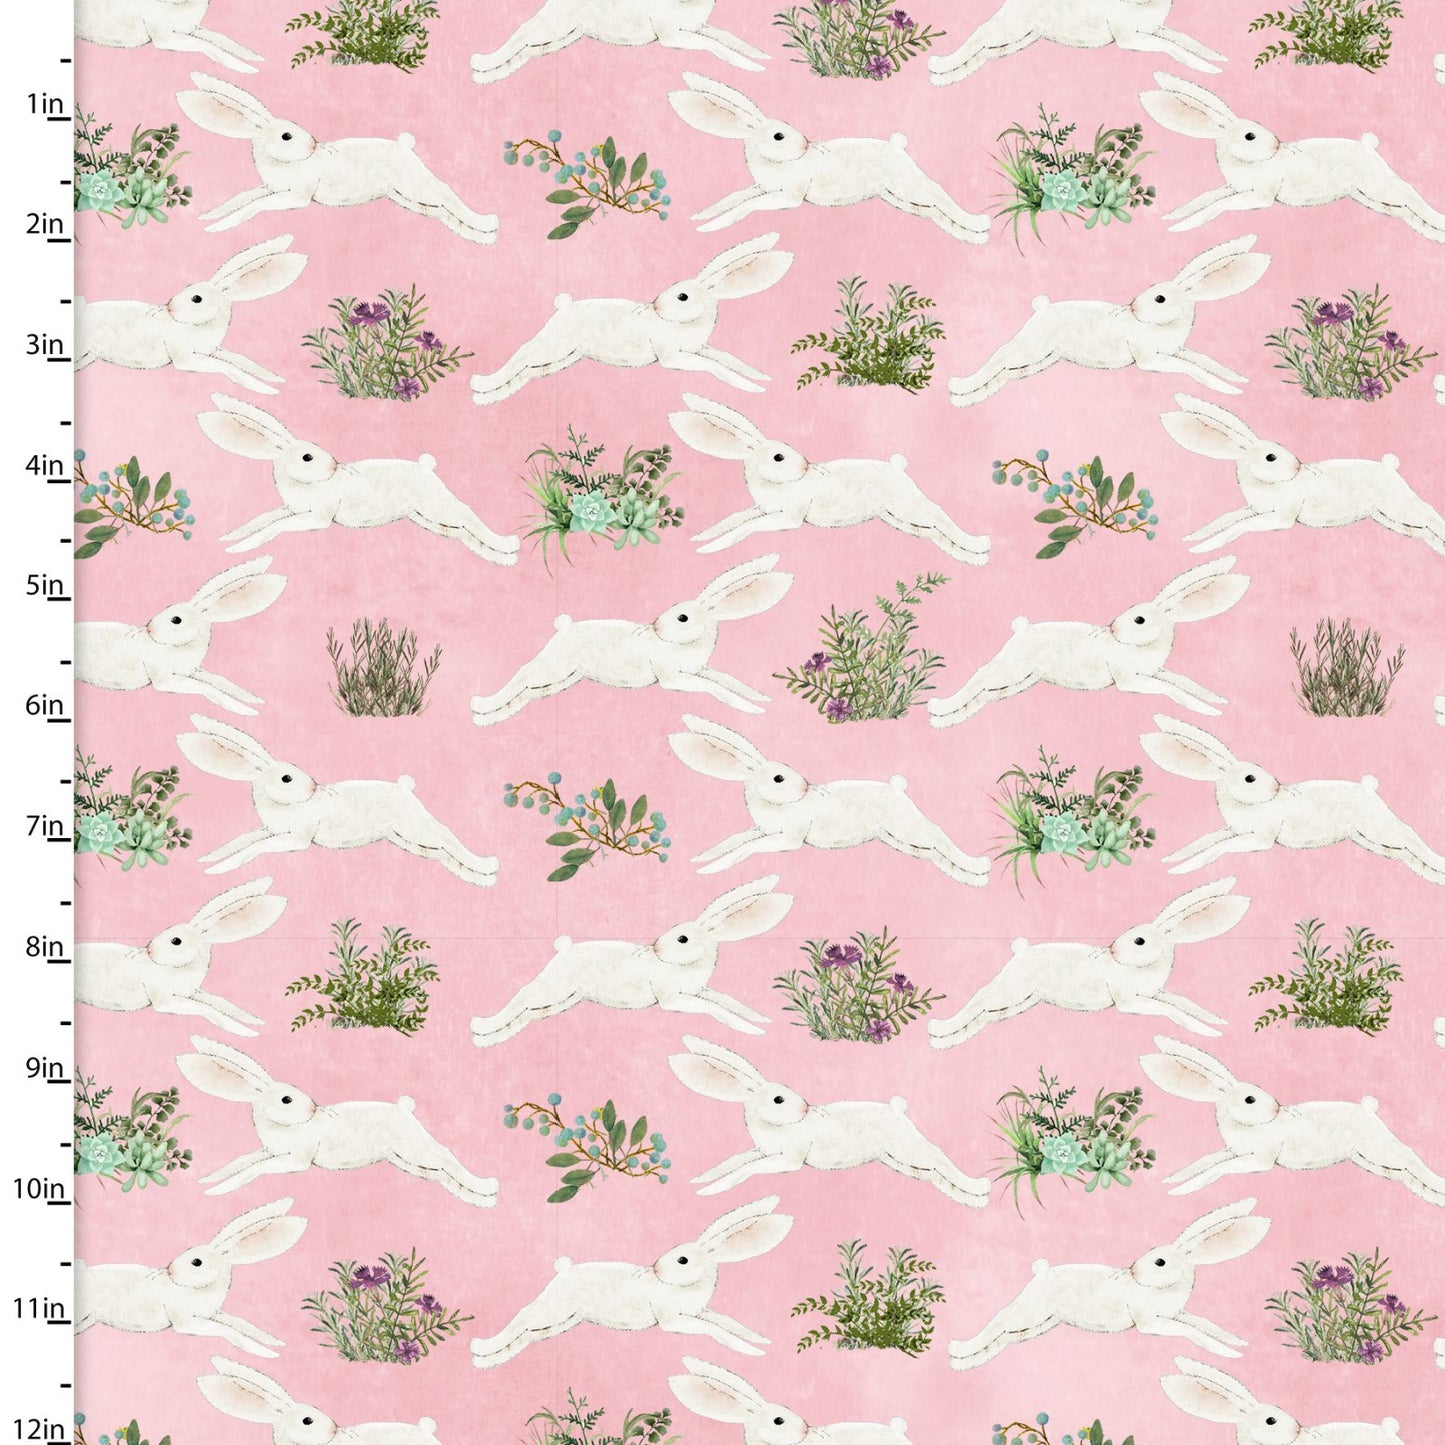 Spring Bunnies on Pink - Weave & Woven